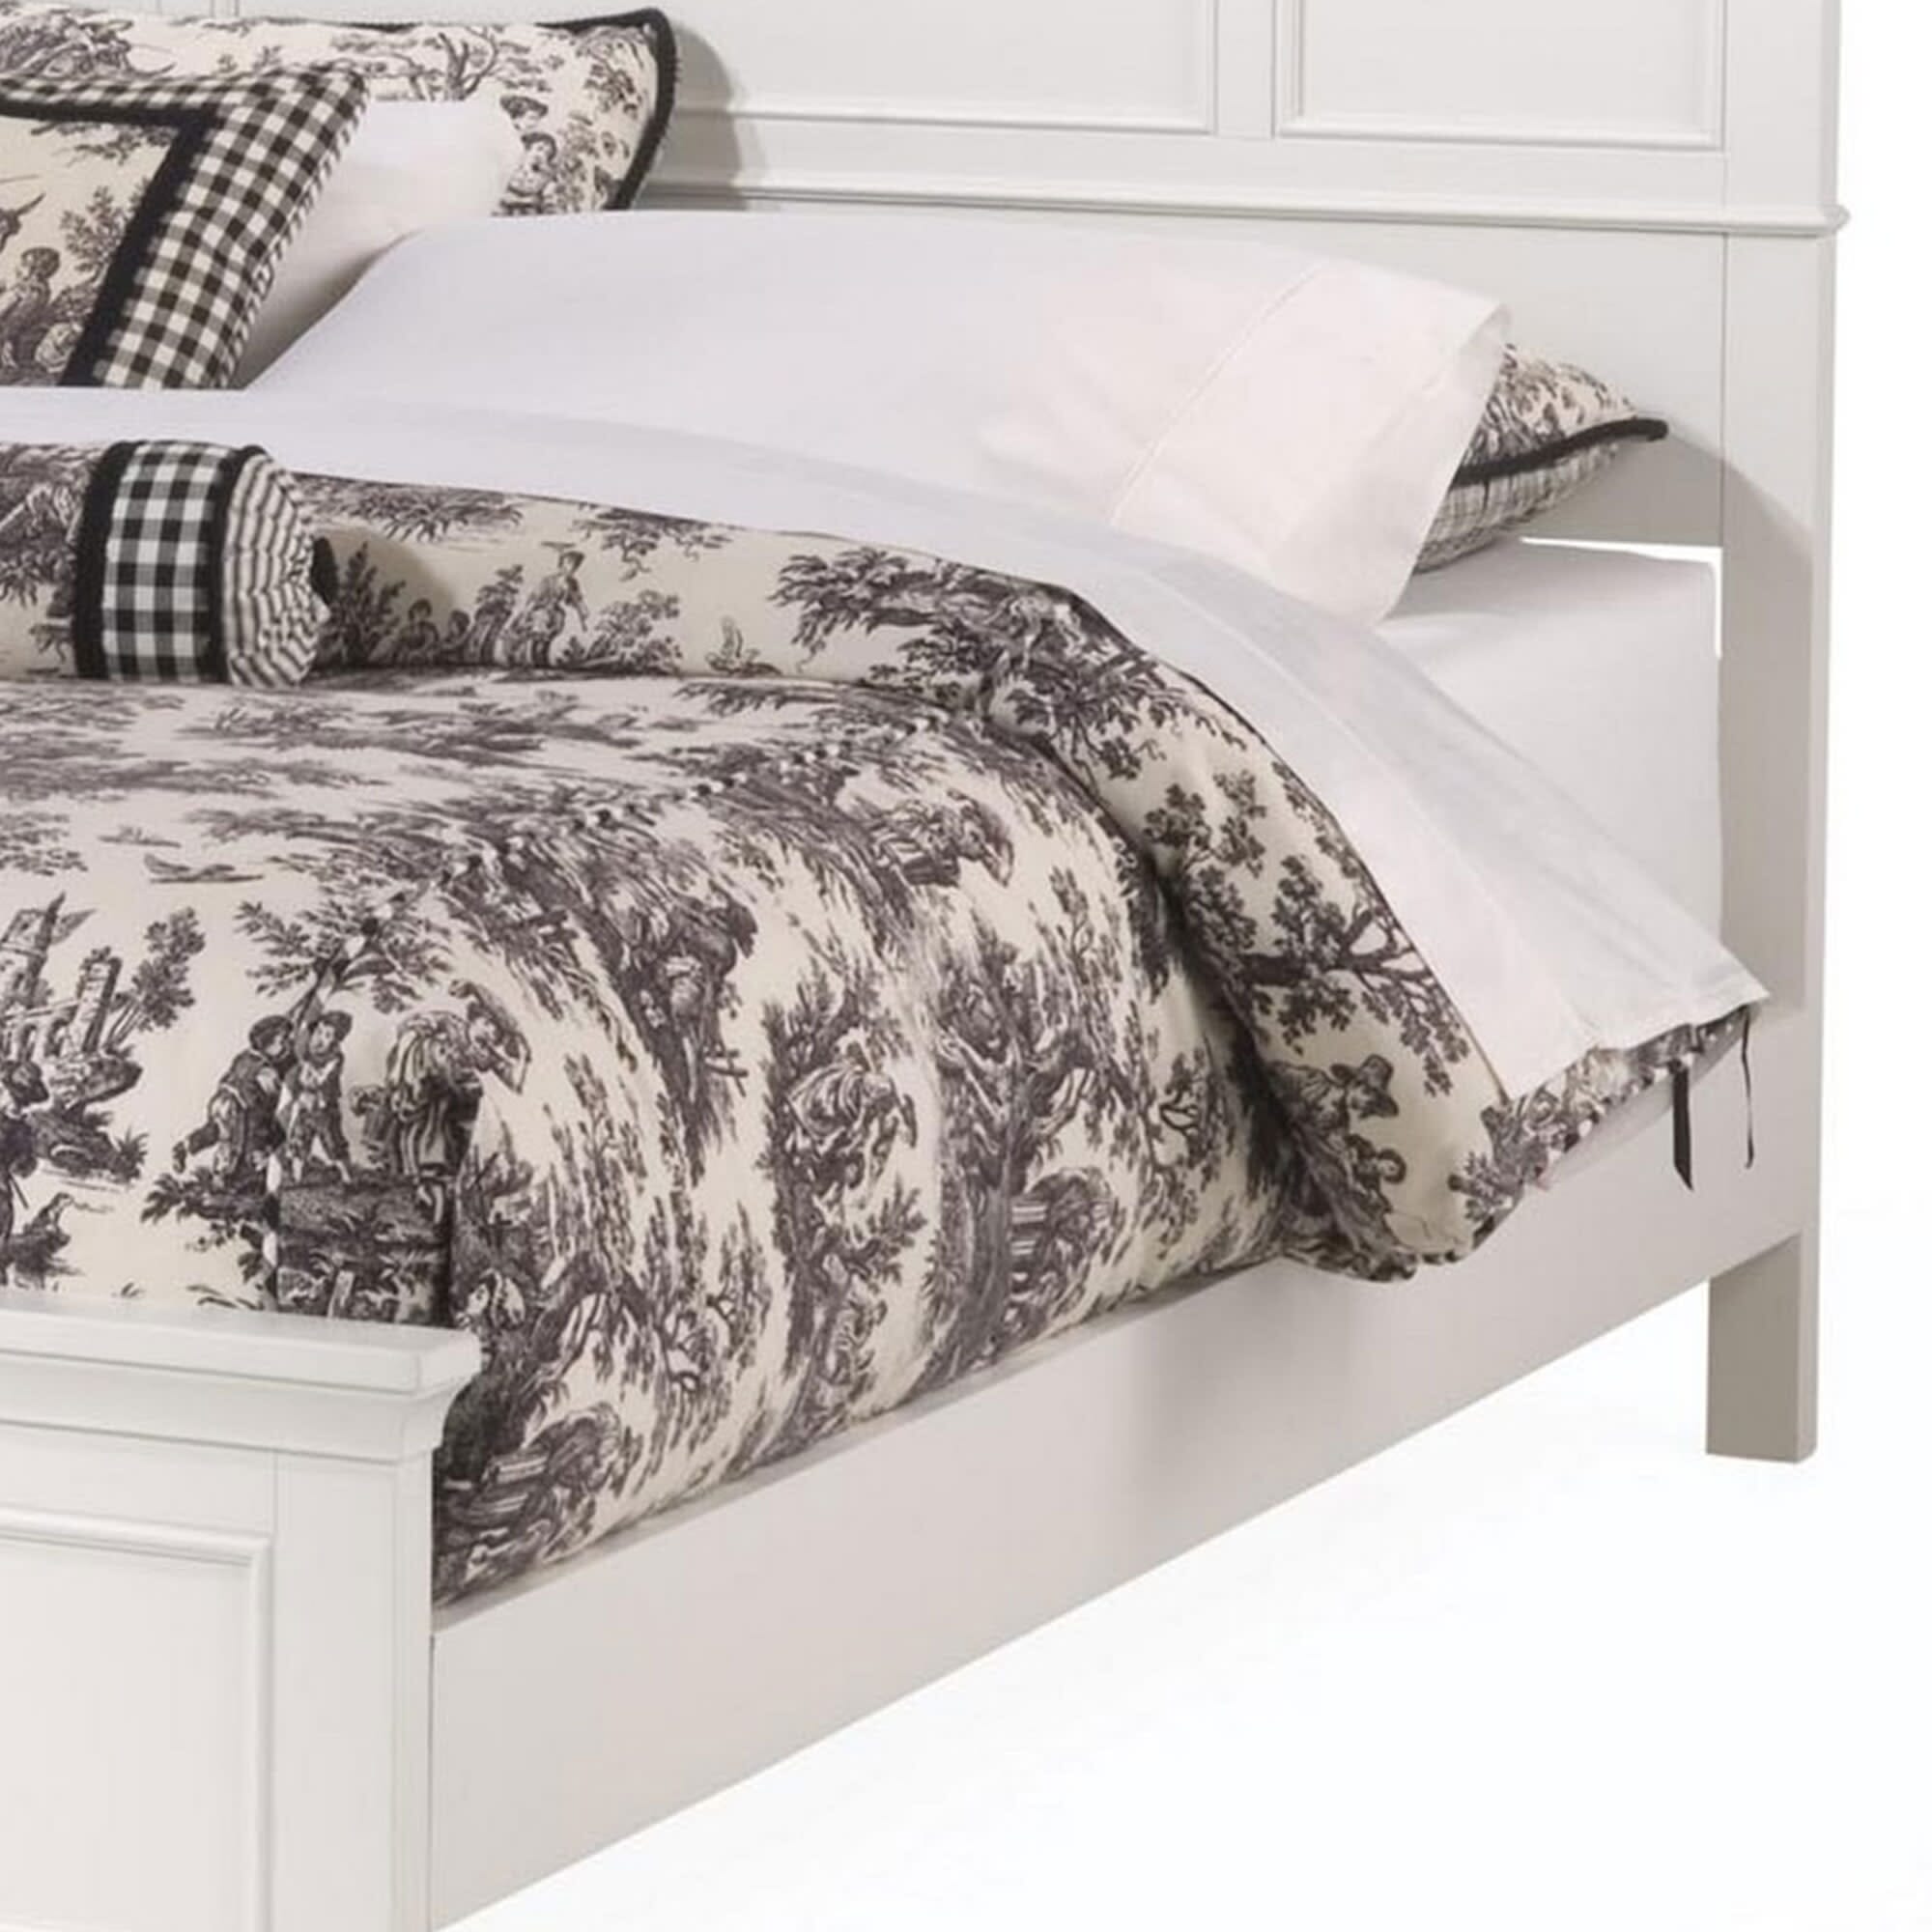 Traditional Queen Bed By Naples Queen Bed Naples